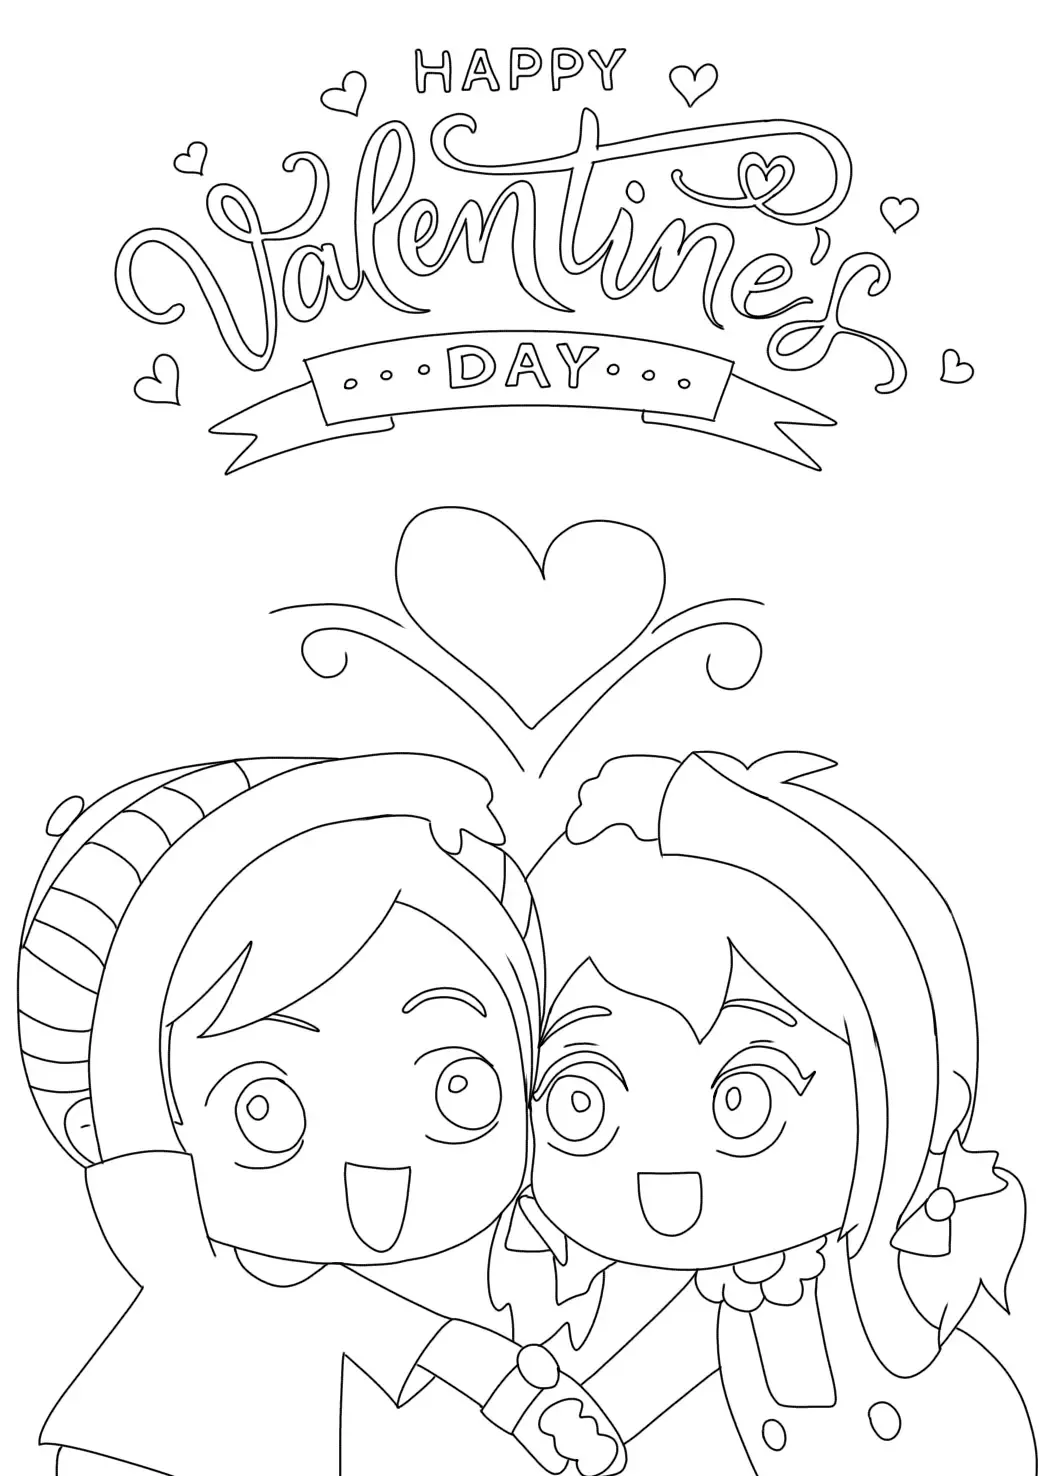 chibi valentine's day colouring sheets